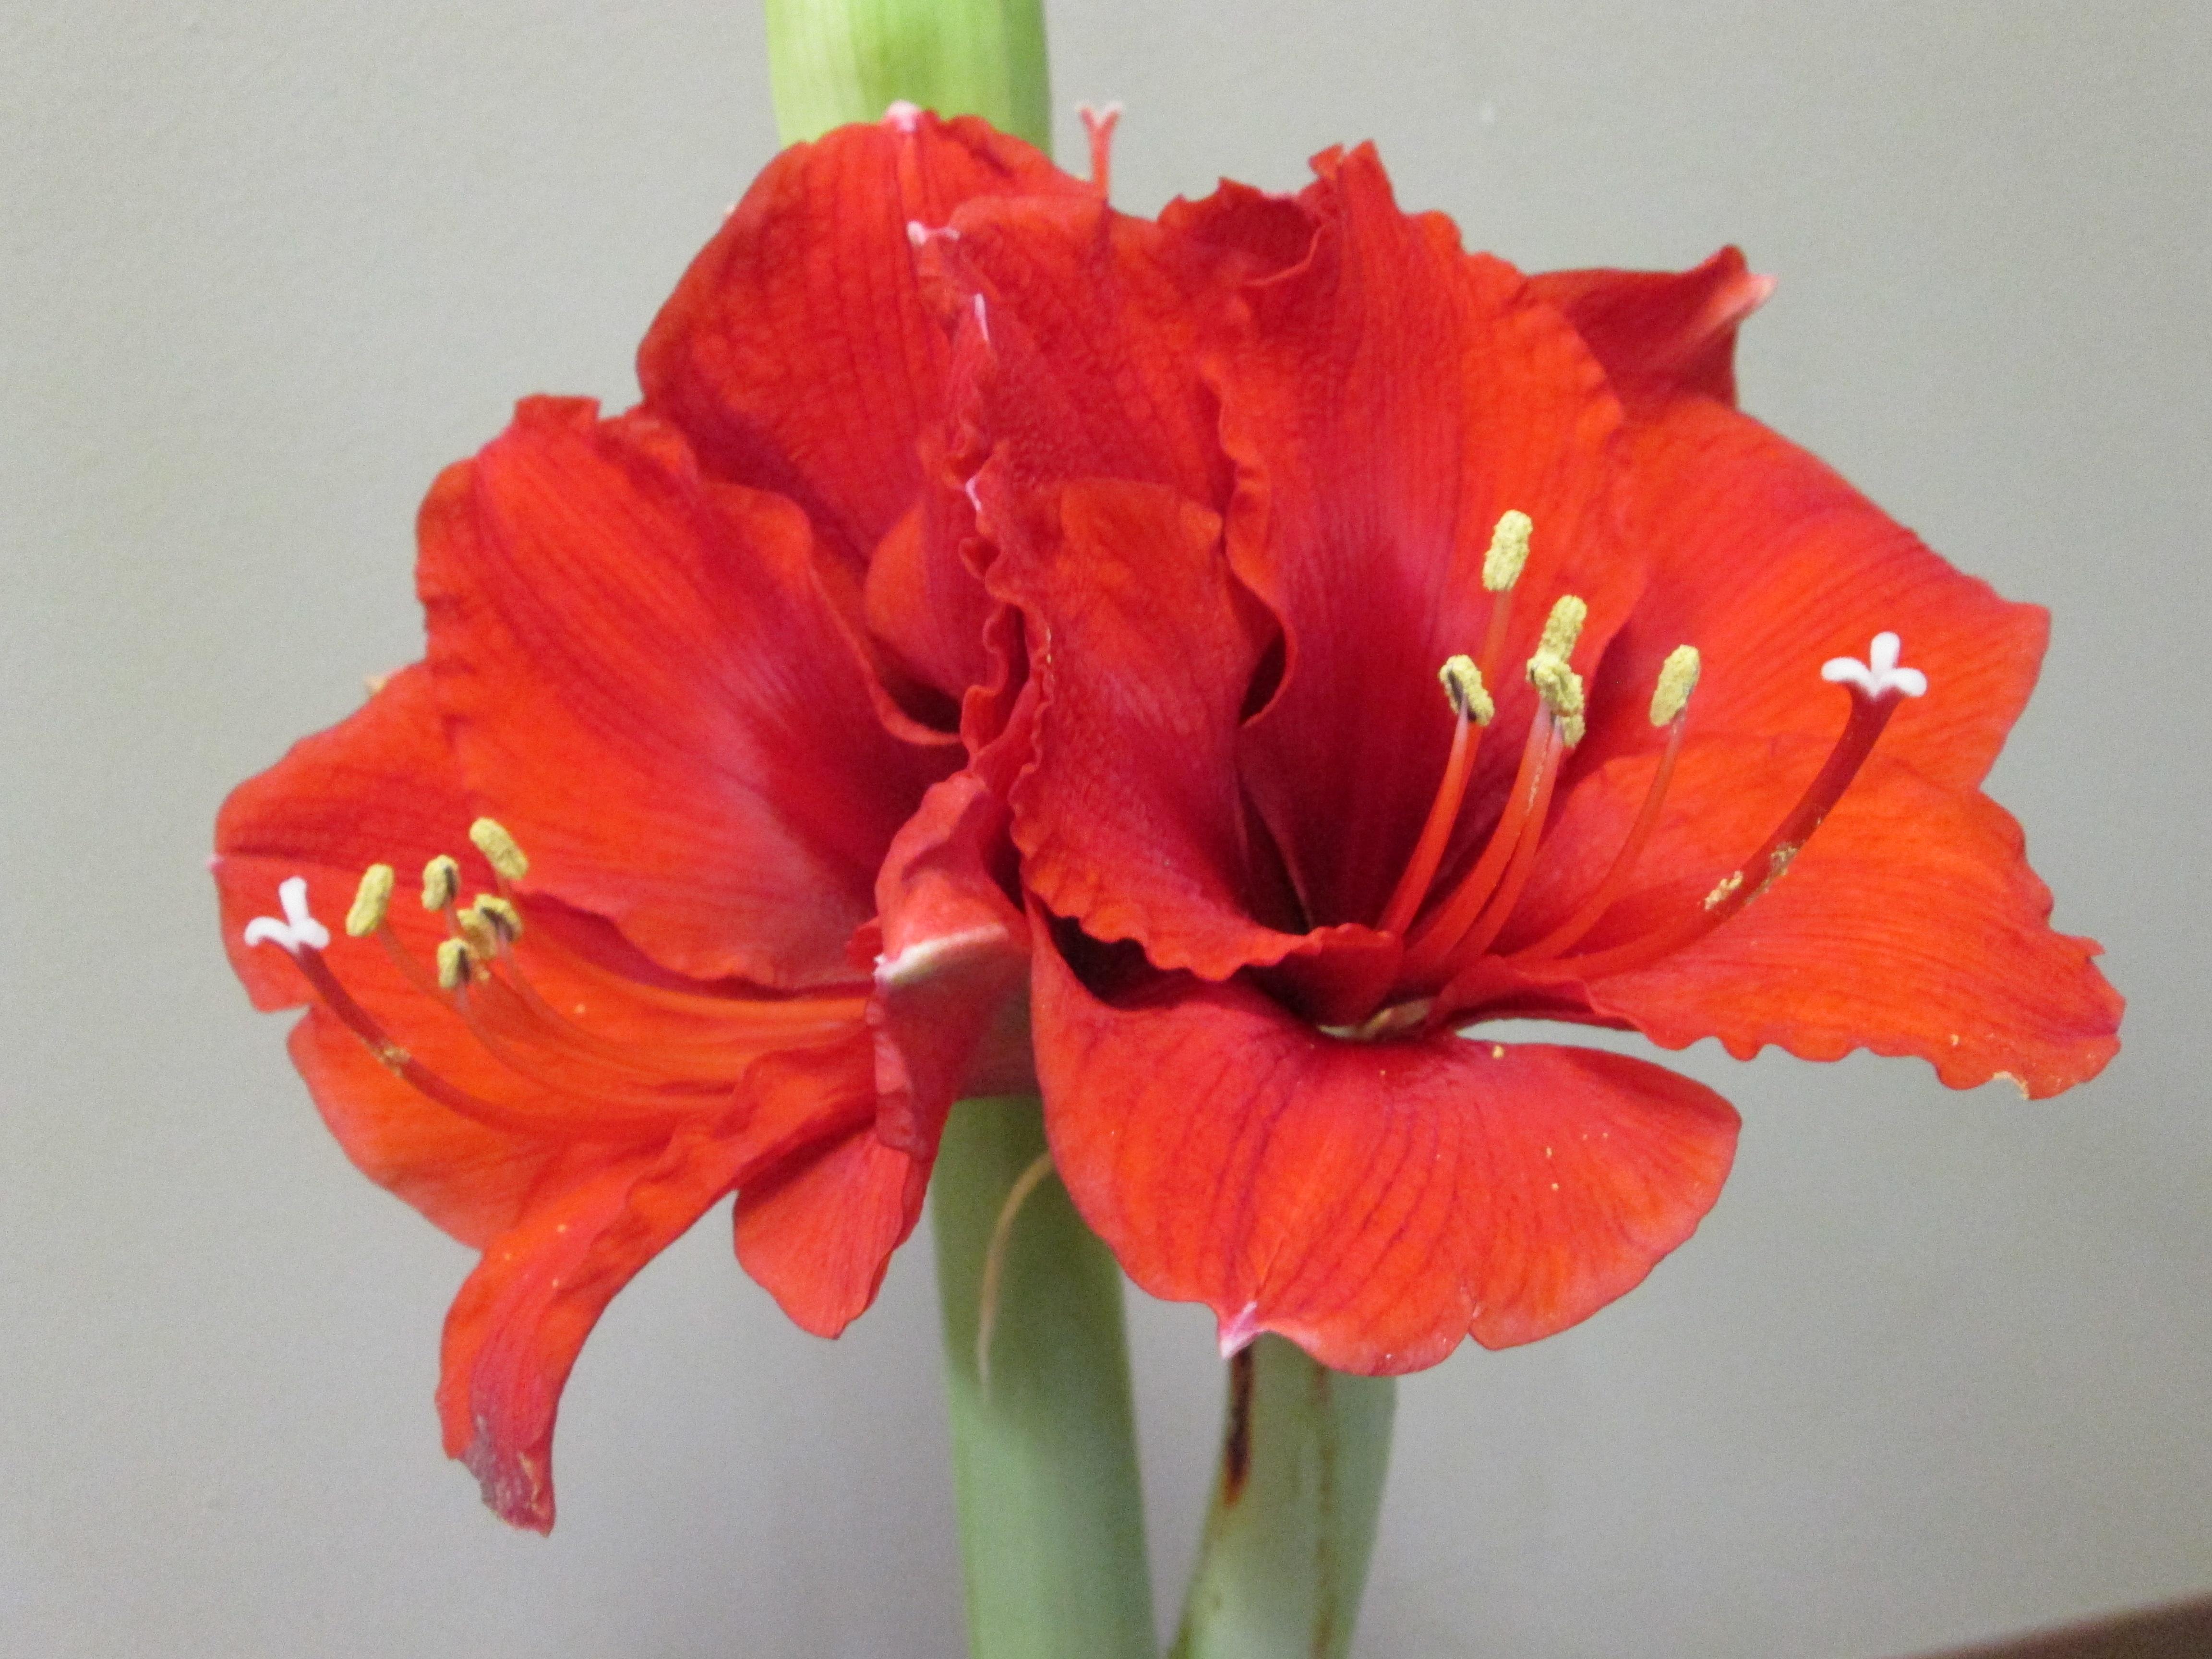 Hippeastrum Holland 'Ludwig's Goliath' - Amaryllis (Shipping begins Oct. 2021) from Leo Berbee Bulb Company